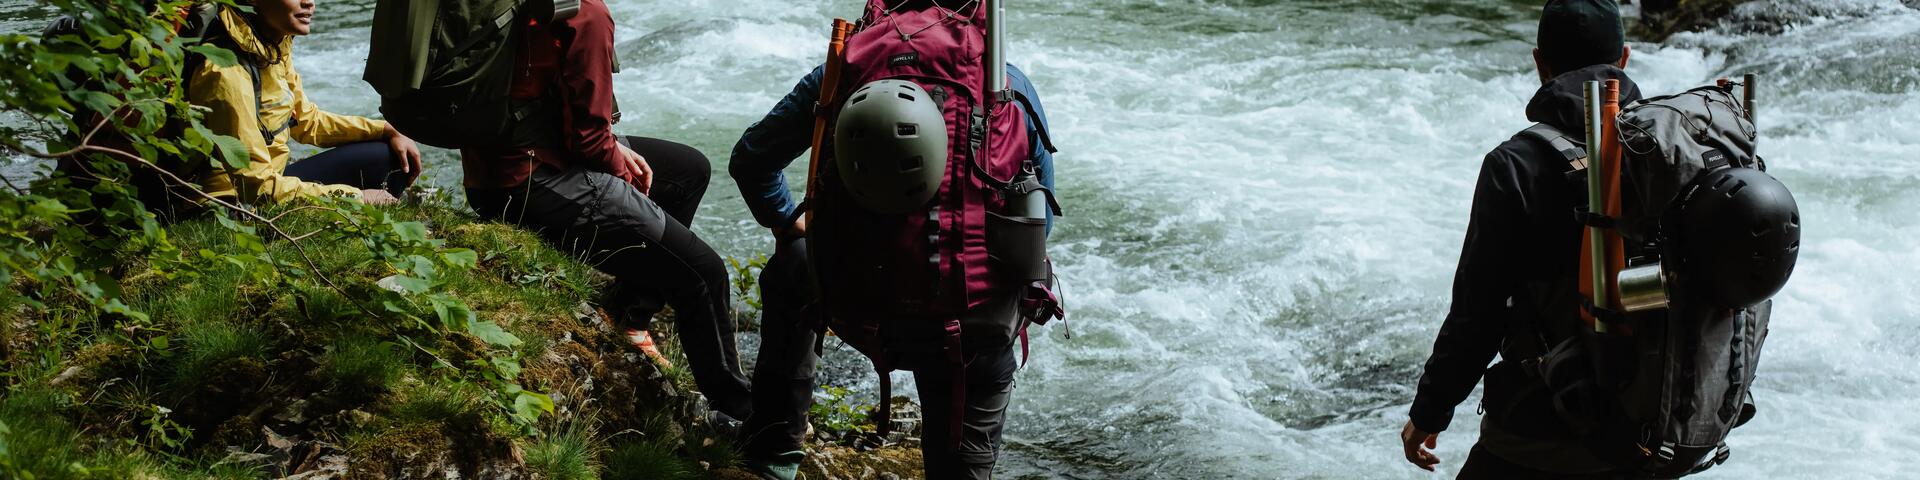 Best Waterproof Backpacks for the Great Outdoors